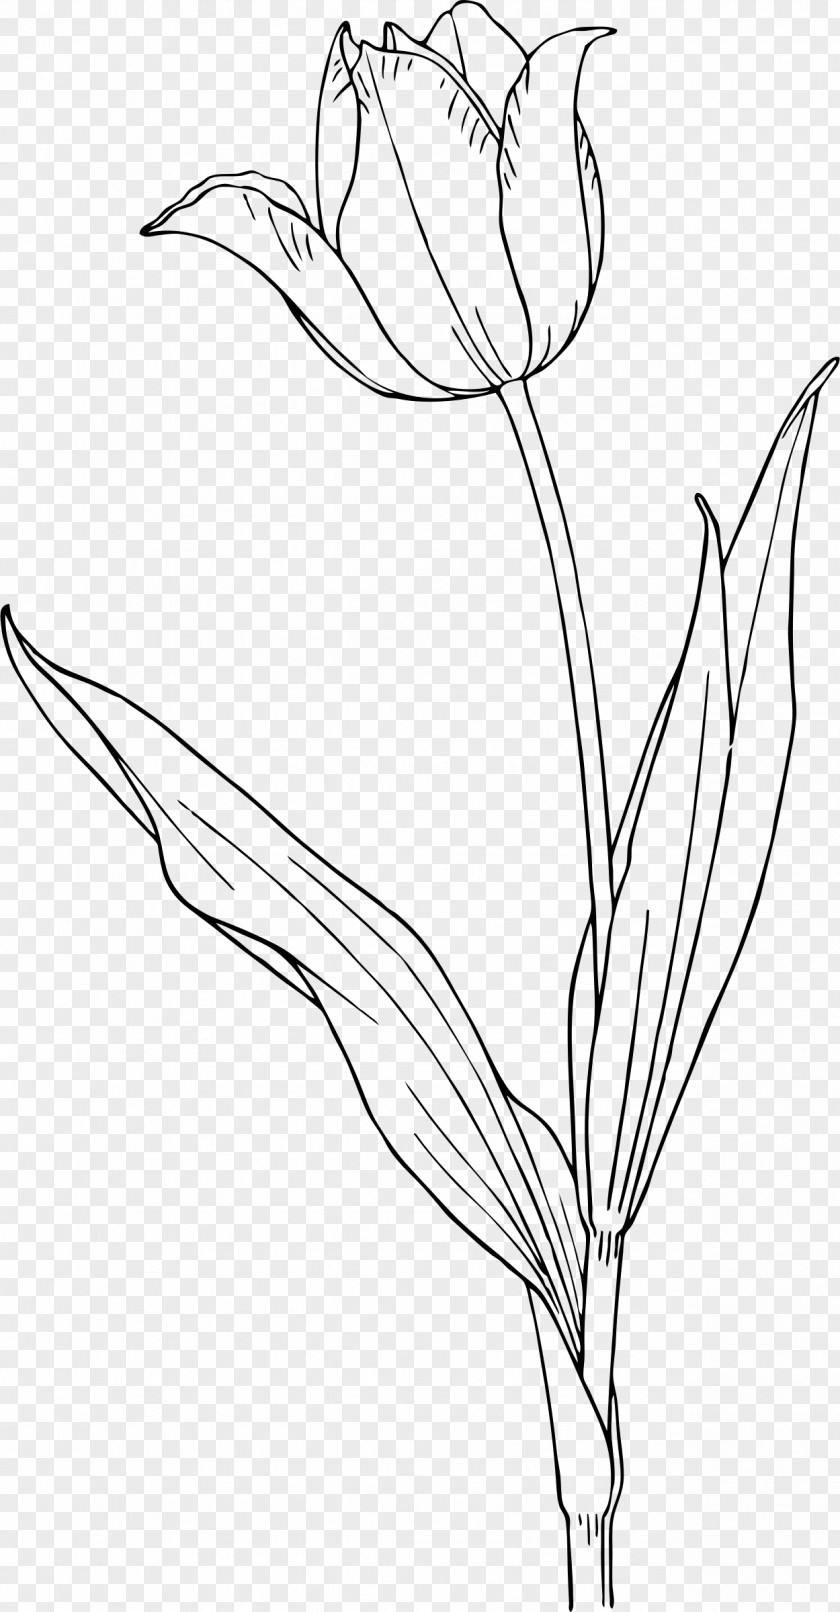 Tulip Tattoo Nature Drawing And Design; Clip Art PNG